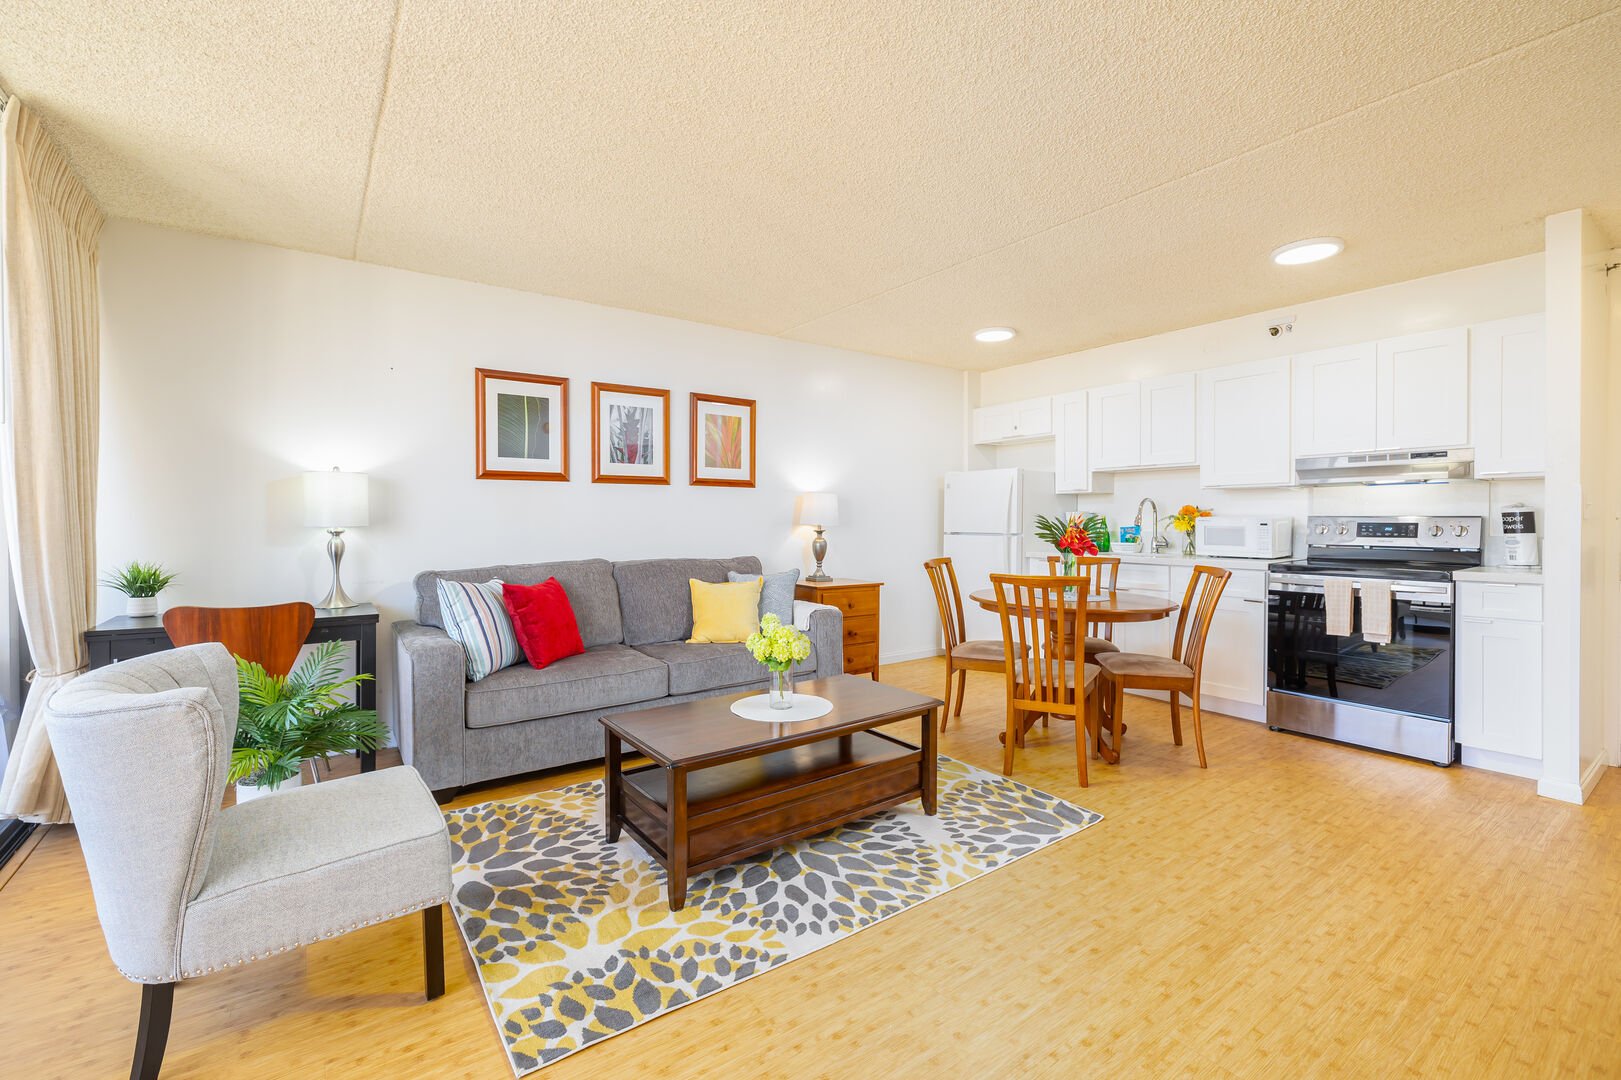 Spacious living space for your relaxation with an open fully equipped kitchen.